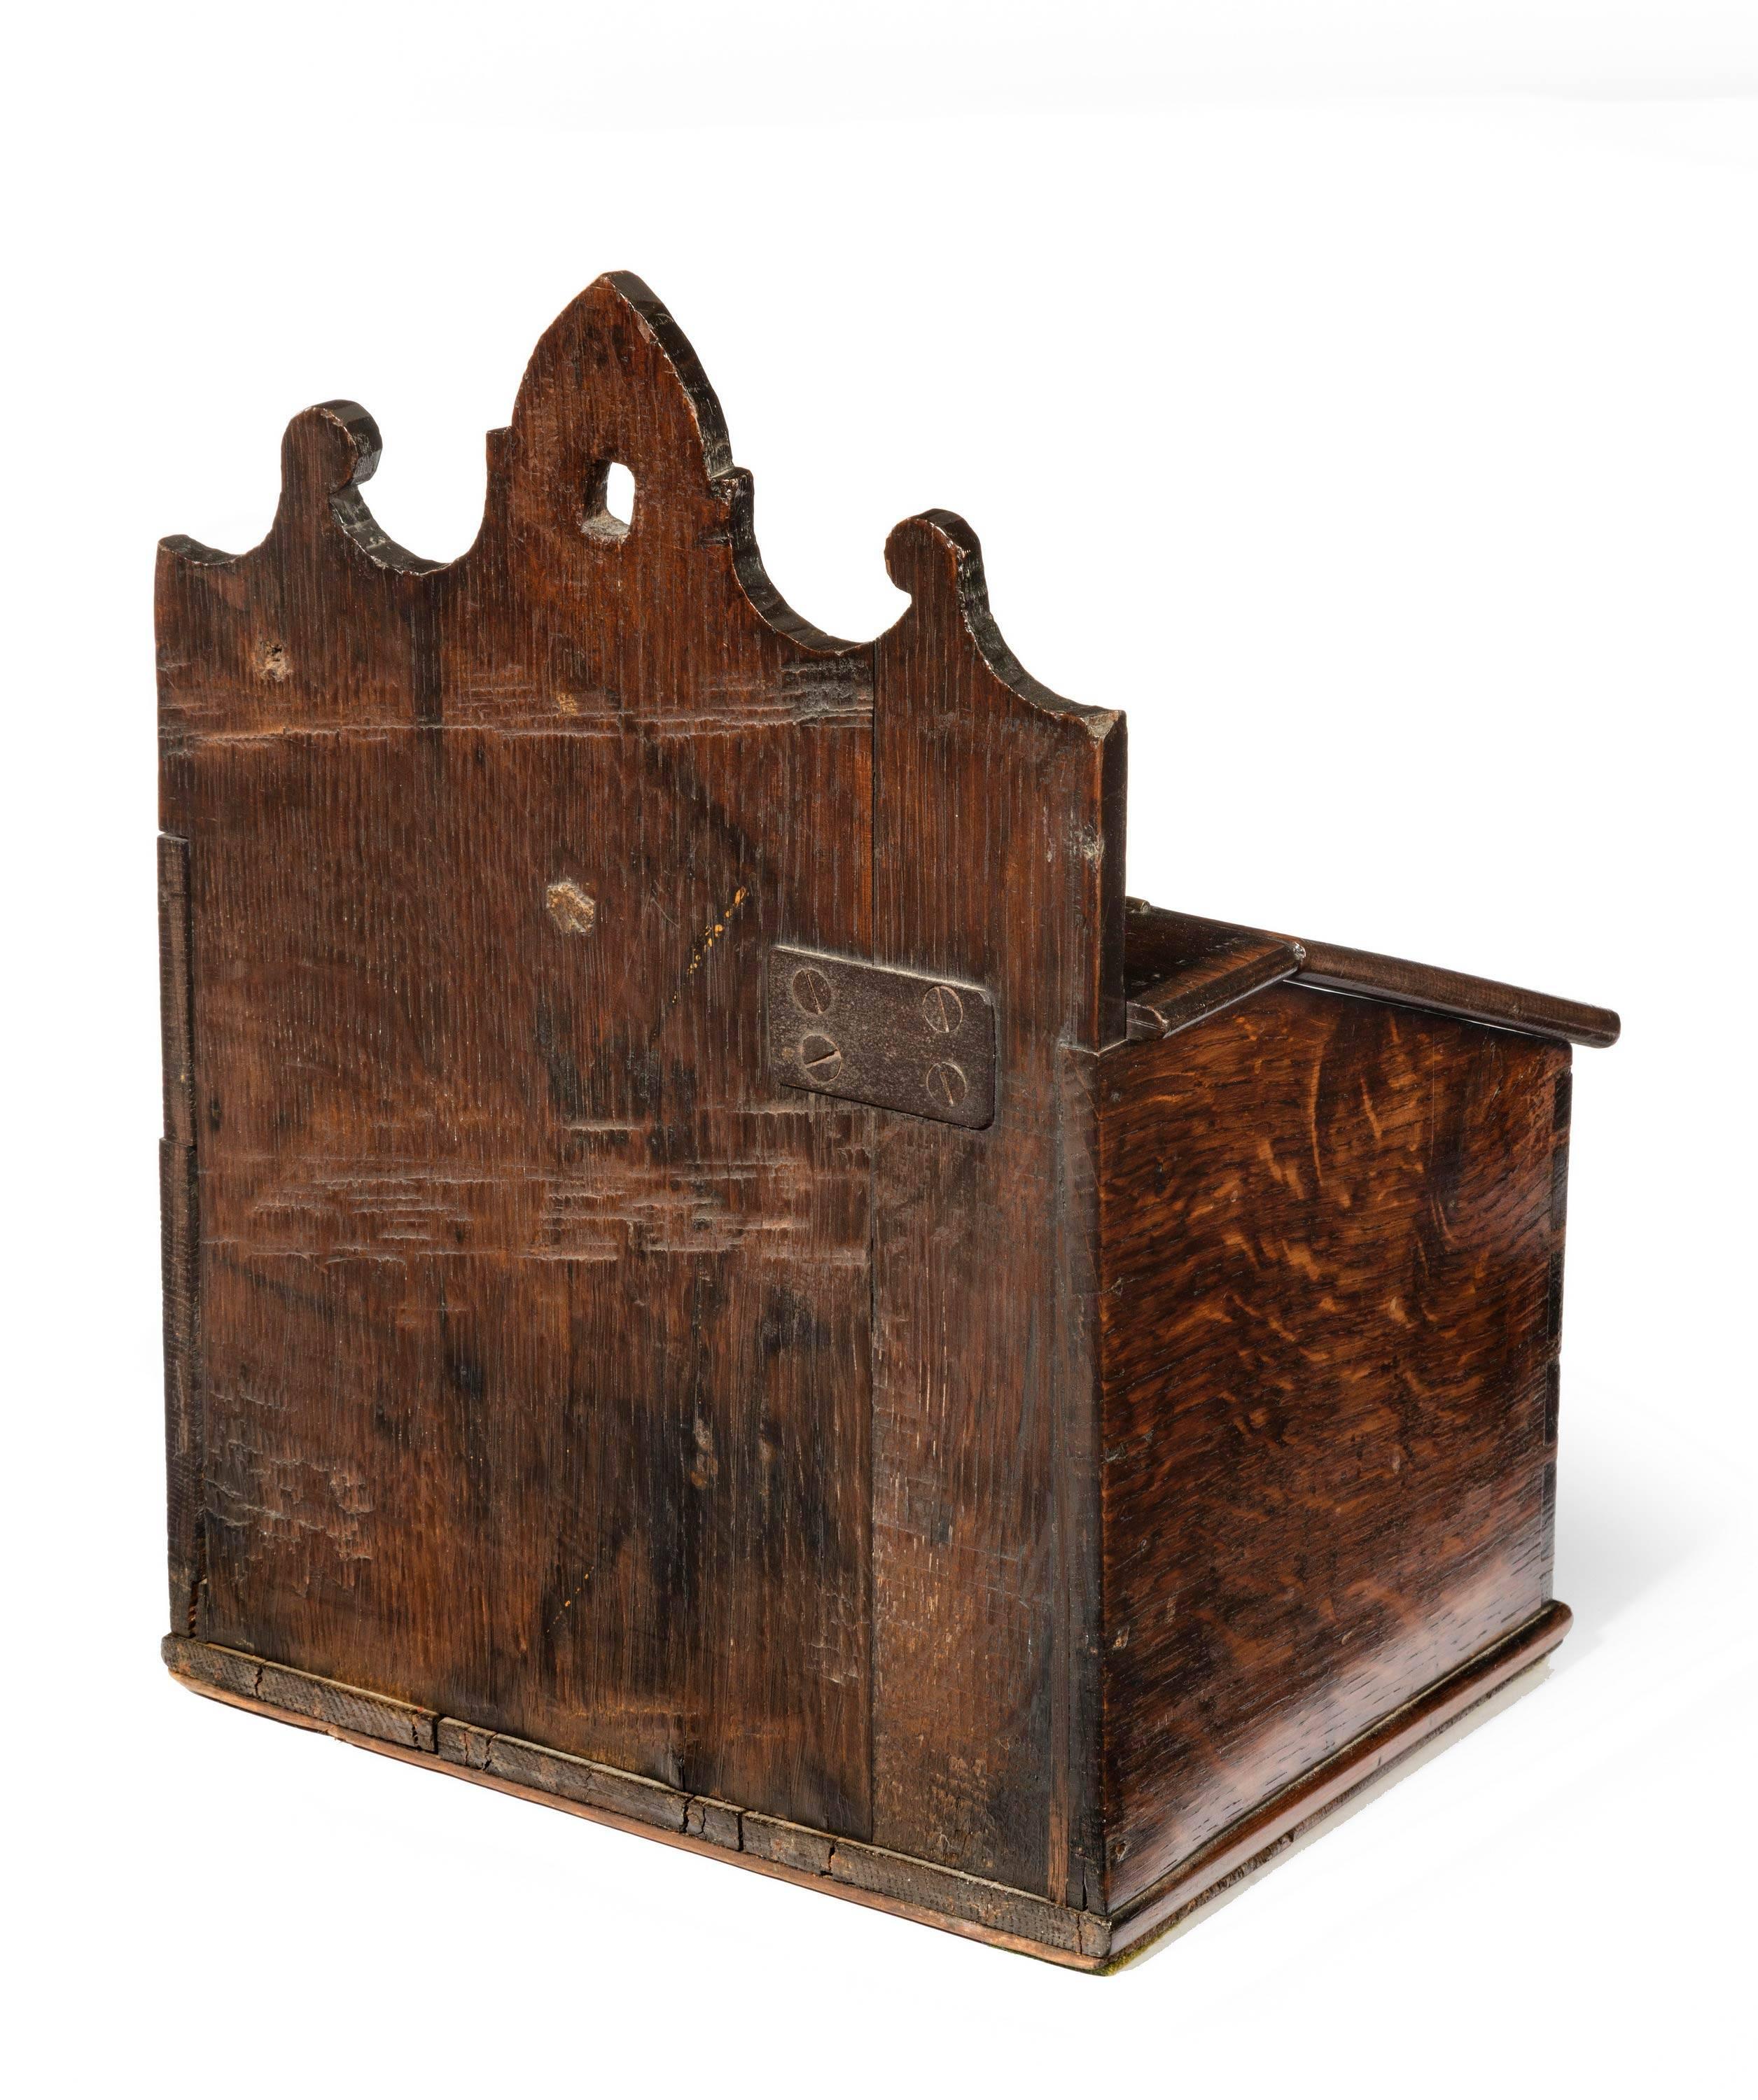 A good mid-18th century oak salt box with a shaped hanging arrangement. Excellent overall condition including the original polish.